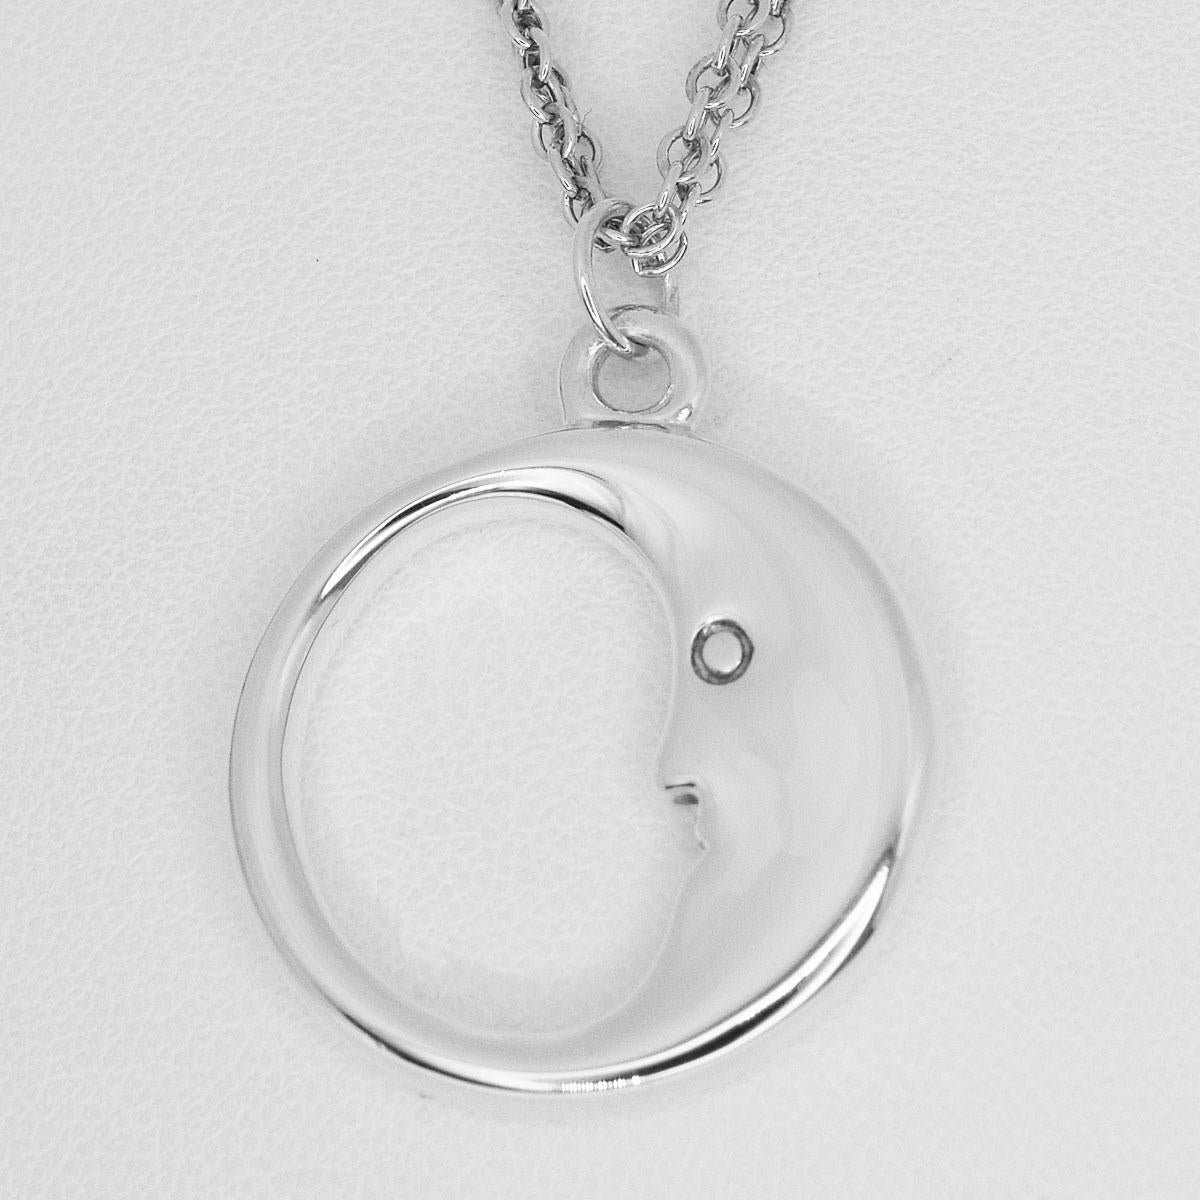 Brand:TIFFANY&Co.
Name:Man in the moon Pendant Necklace
Material:925 SV Sterling Silver
Weight:11.0g（Approx)
neck around:41cm / 16.14in（Approx)
Comes with:Tiffany box and pouch